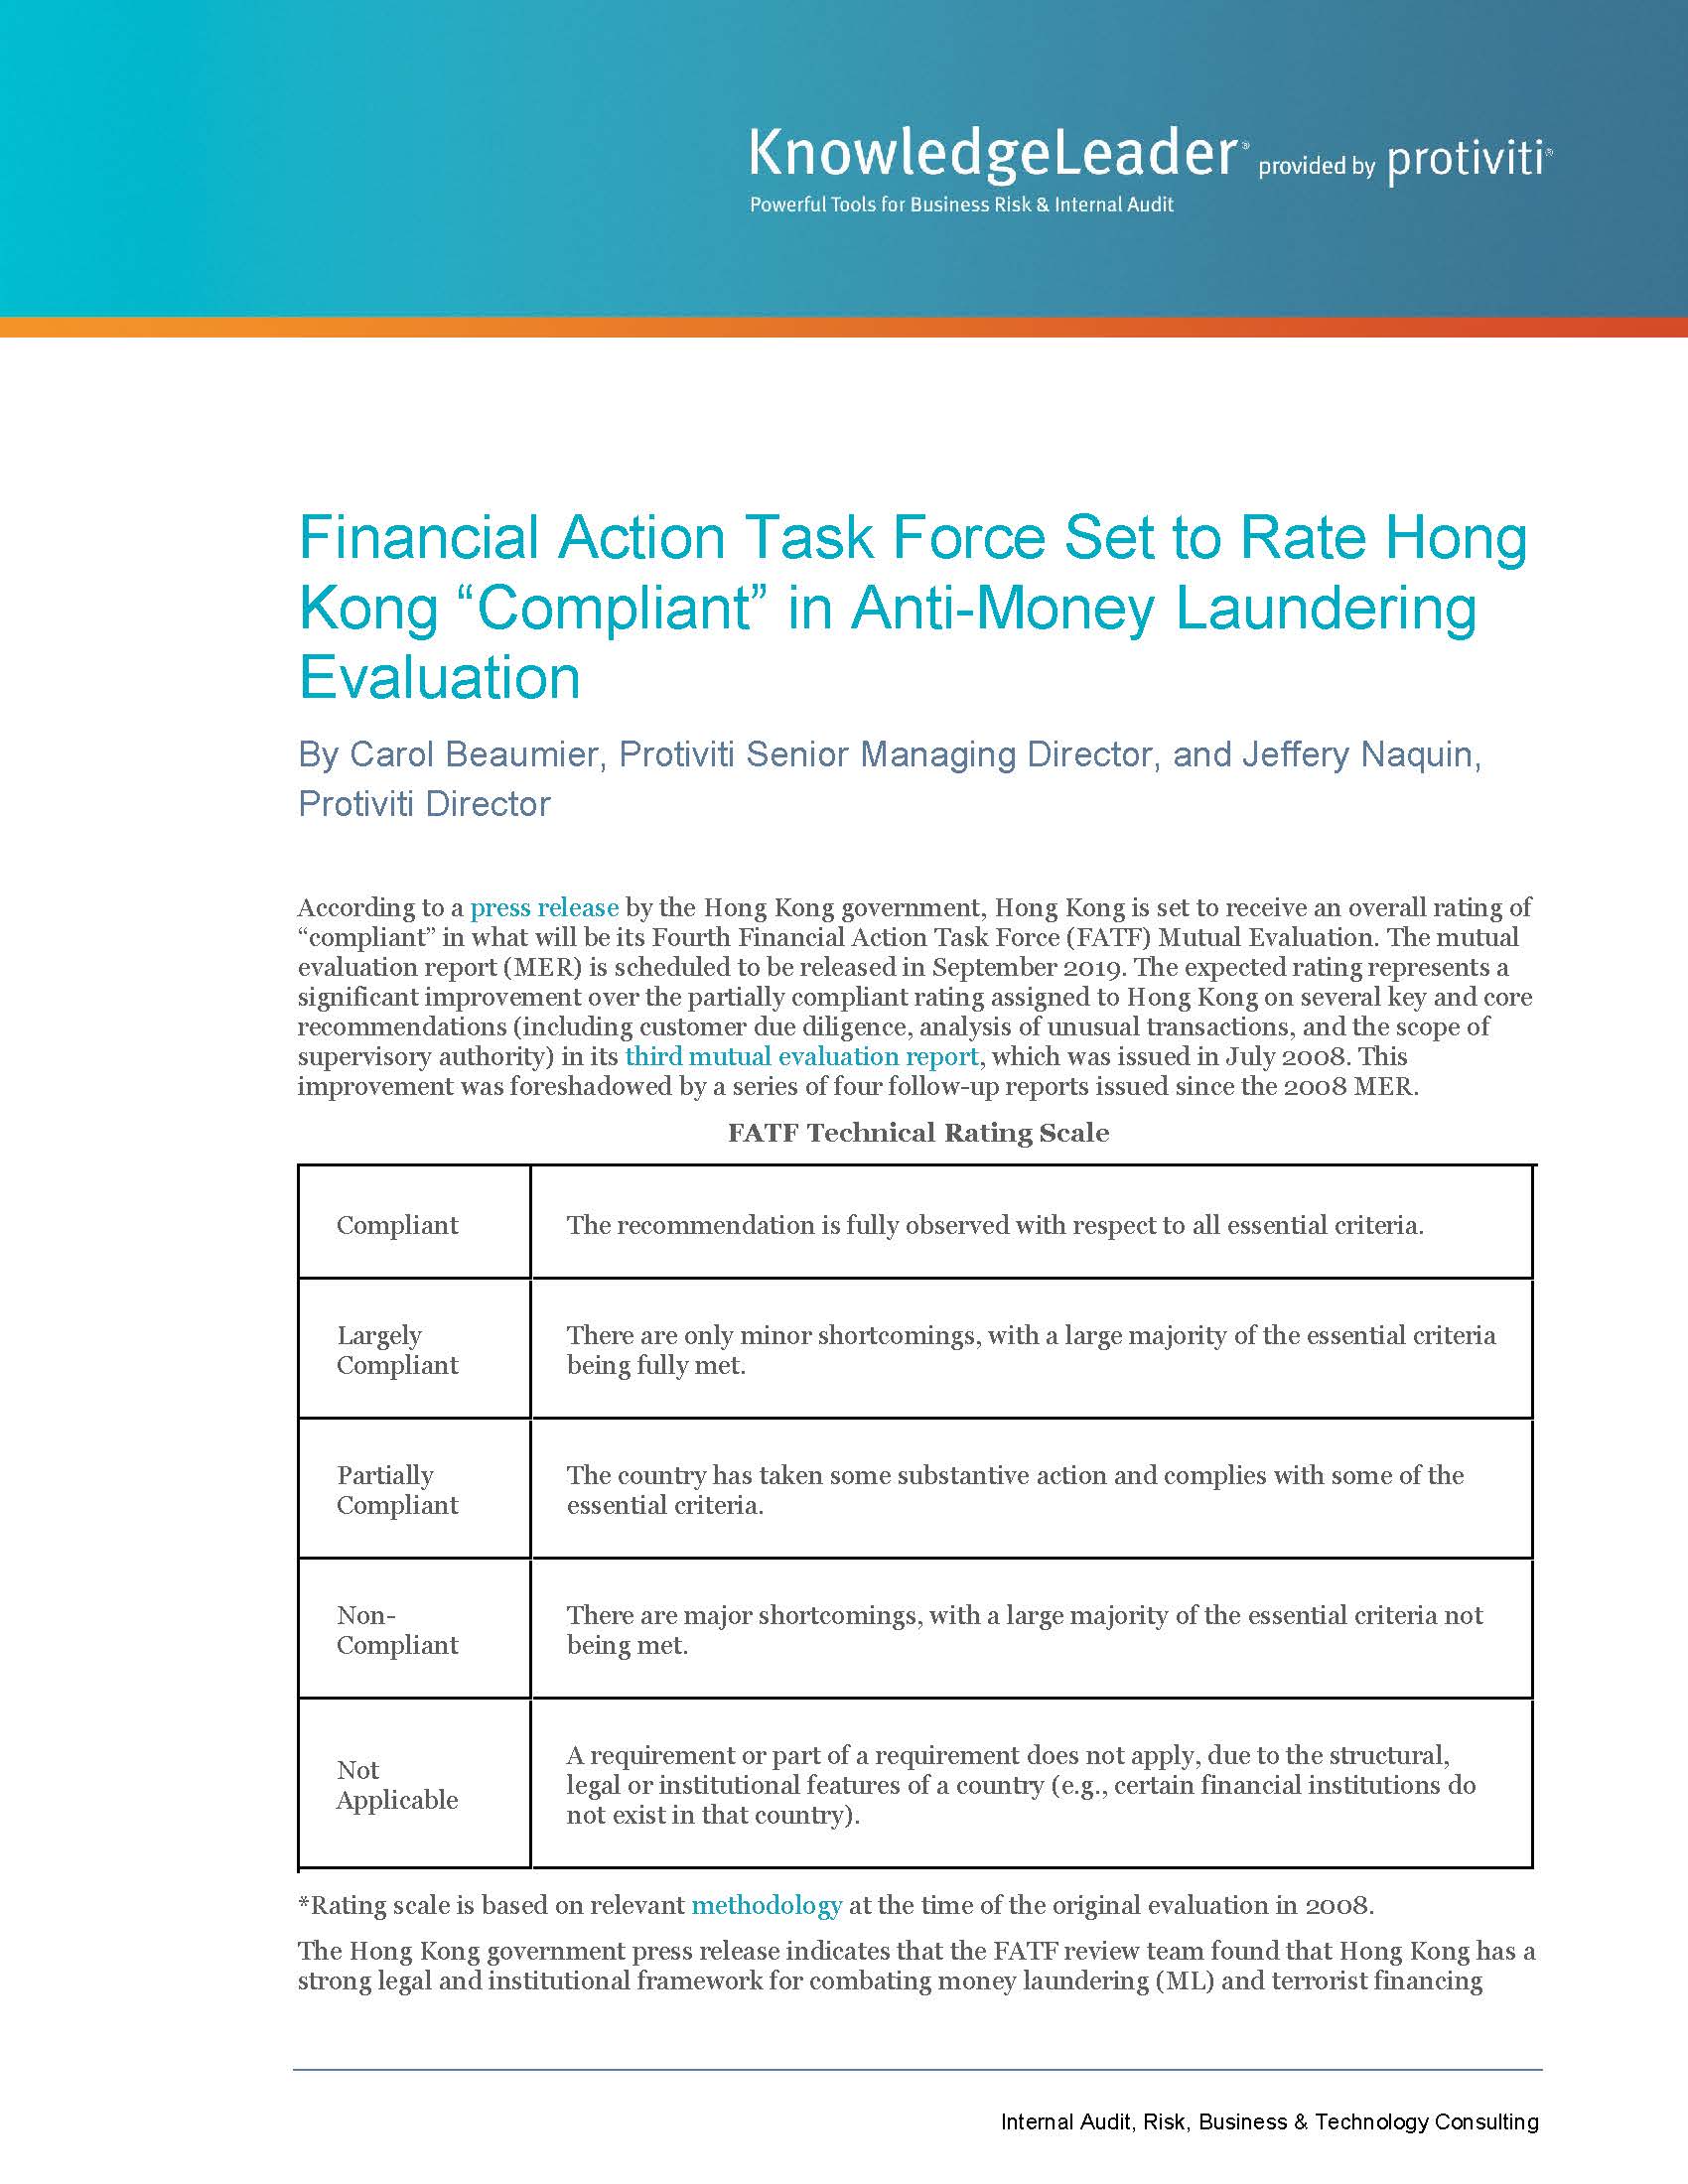 Screenshot of the first page of Financial Action Task Force Set to Rate Hong Kong “Compliant” in Anti-Money Laundering Evaluation